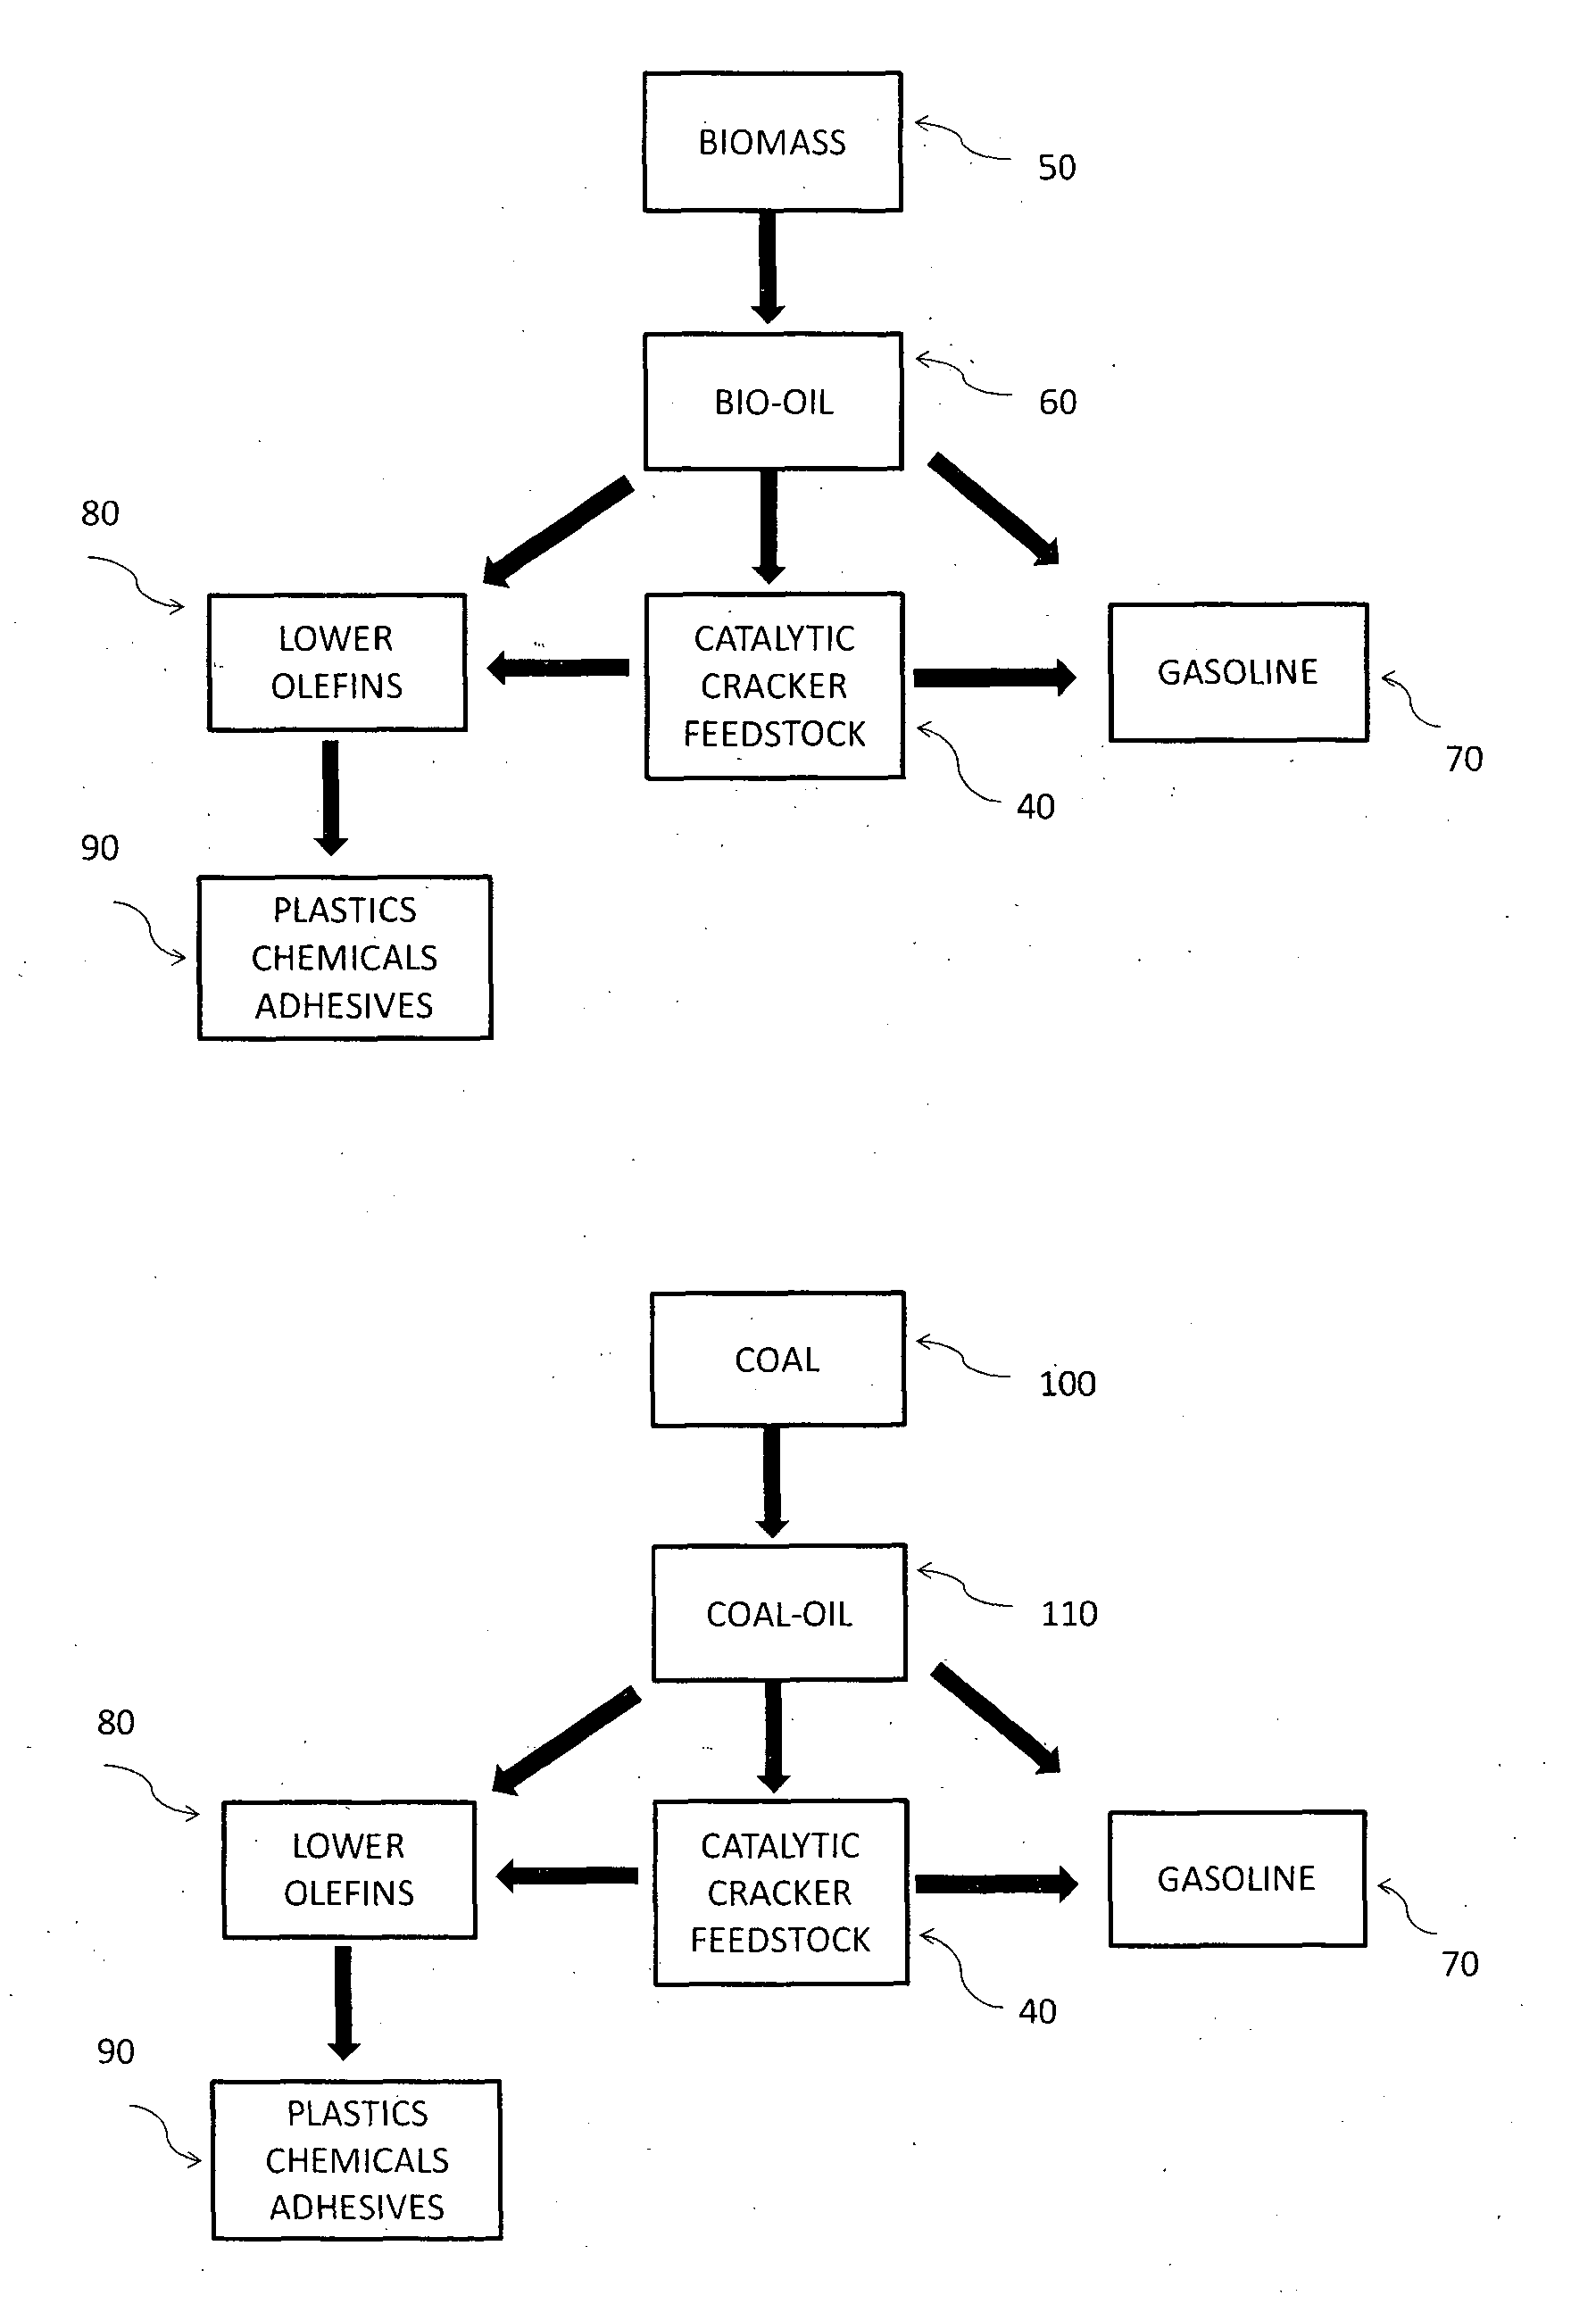 Methods for Producing Hydrocarbon Products from Bio-Oils and/or Coal-Oils